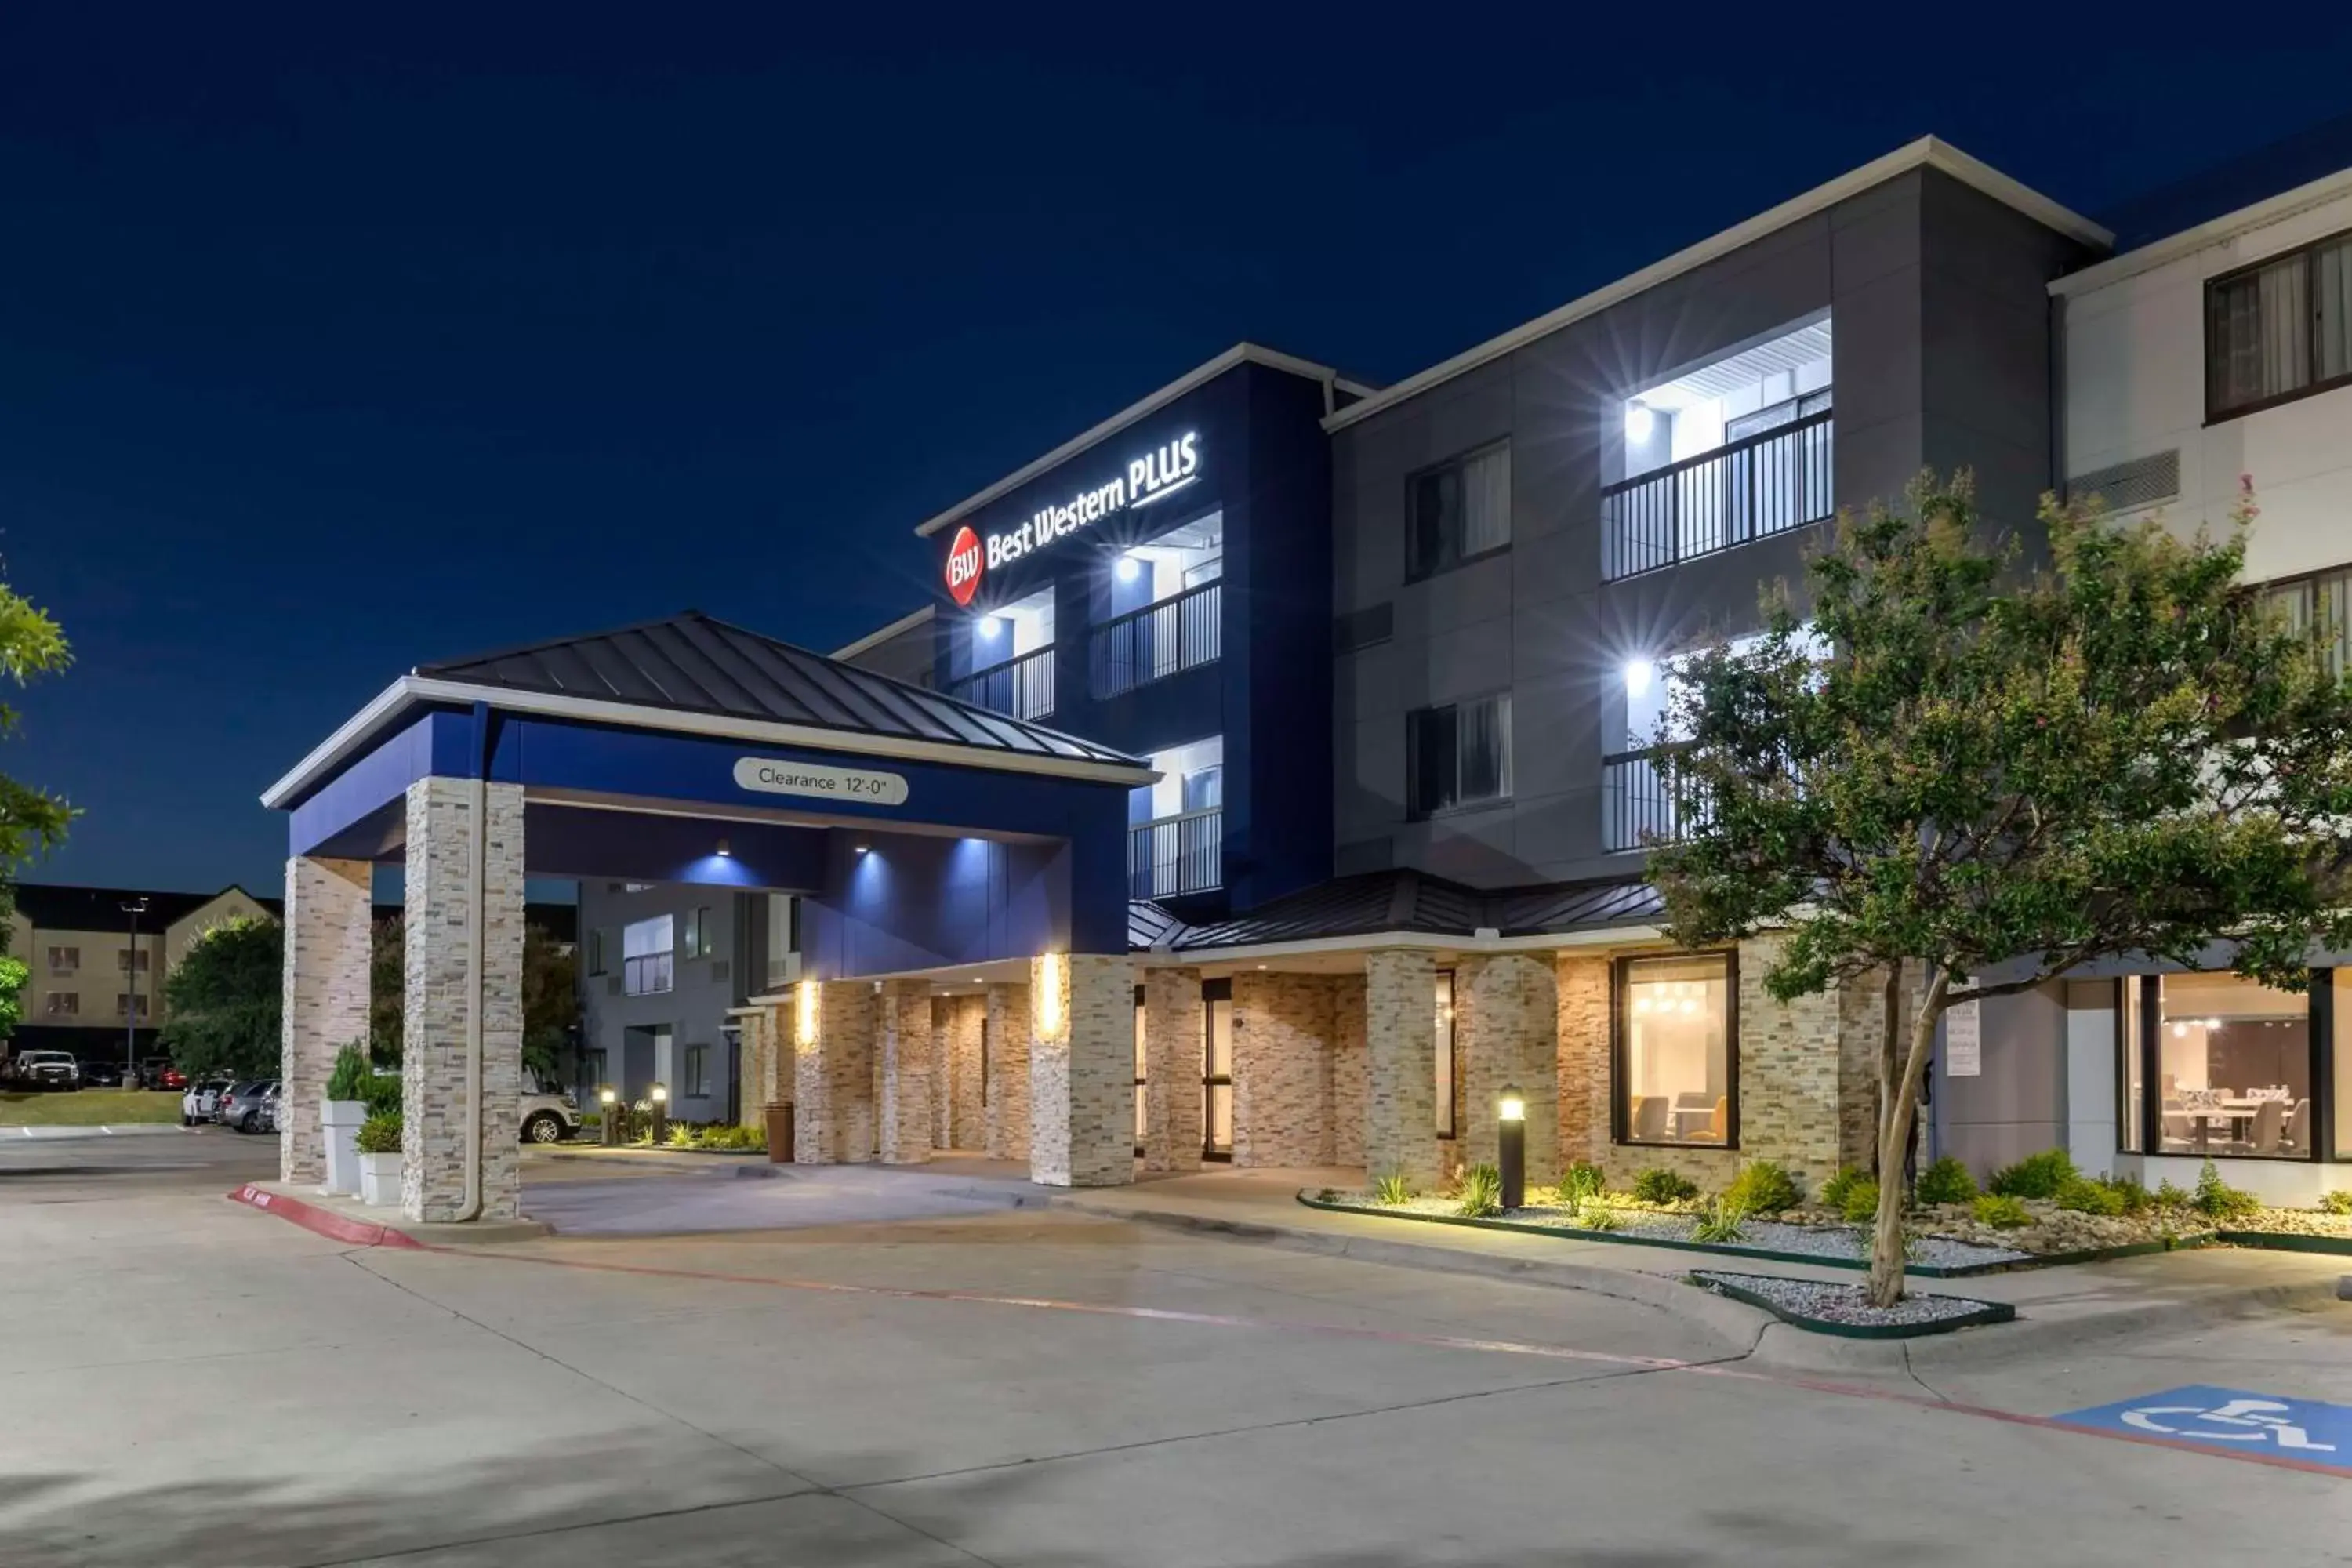 Property Building in Best Western Plus Fort Worth North